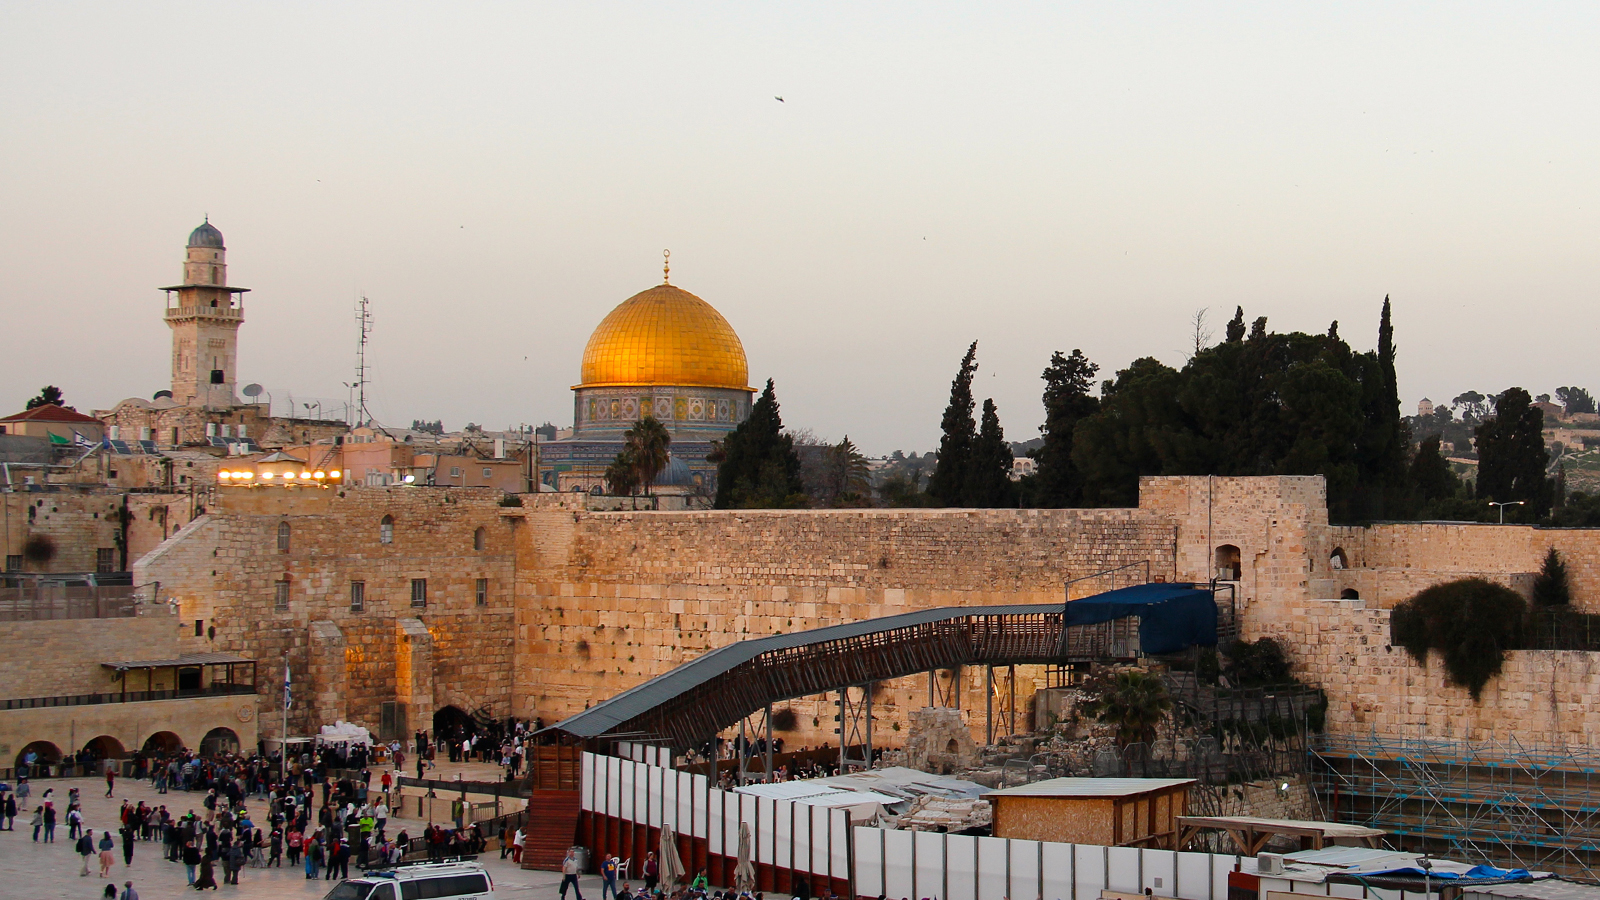 Holy sites in Jerusalem’s Old City, including the Western Wall and Dome of the Rock, on March 13, 2019. All three Abrahamic faiths make claims to parts of Jerusalem. RNS photo by Emily McFarlan Miller